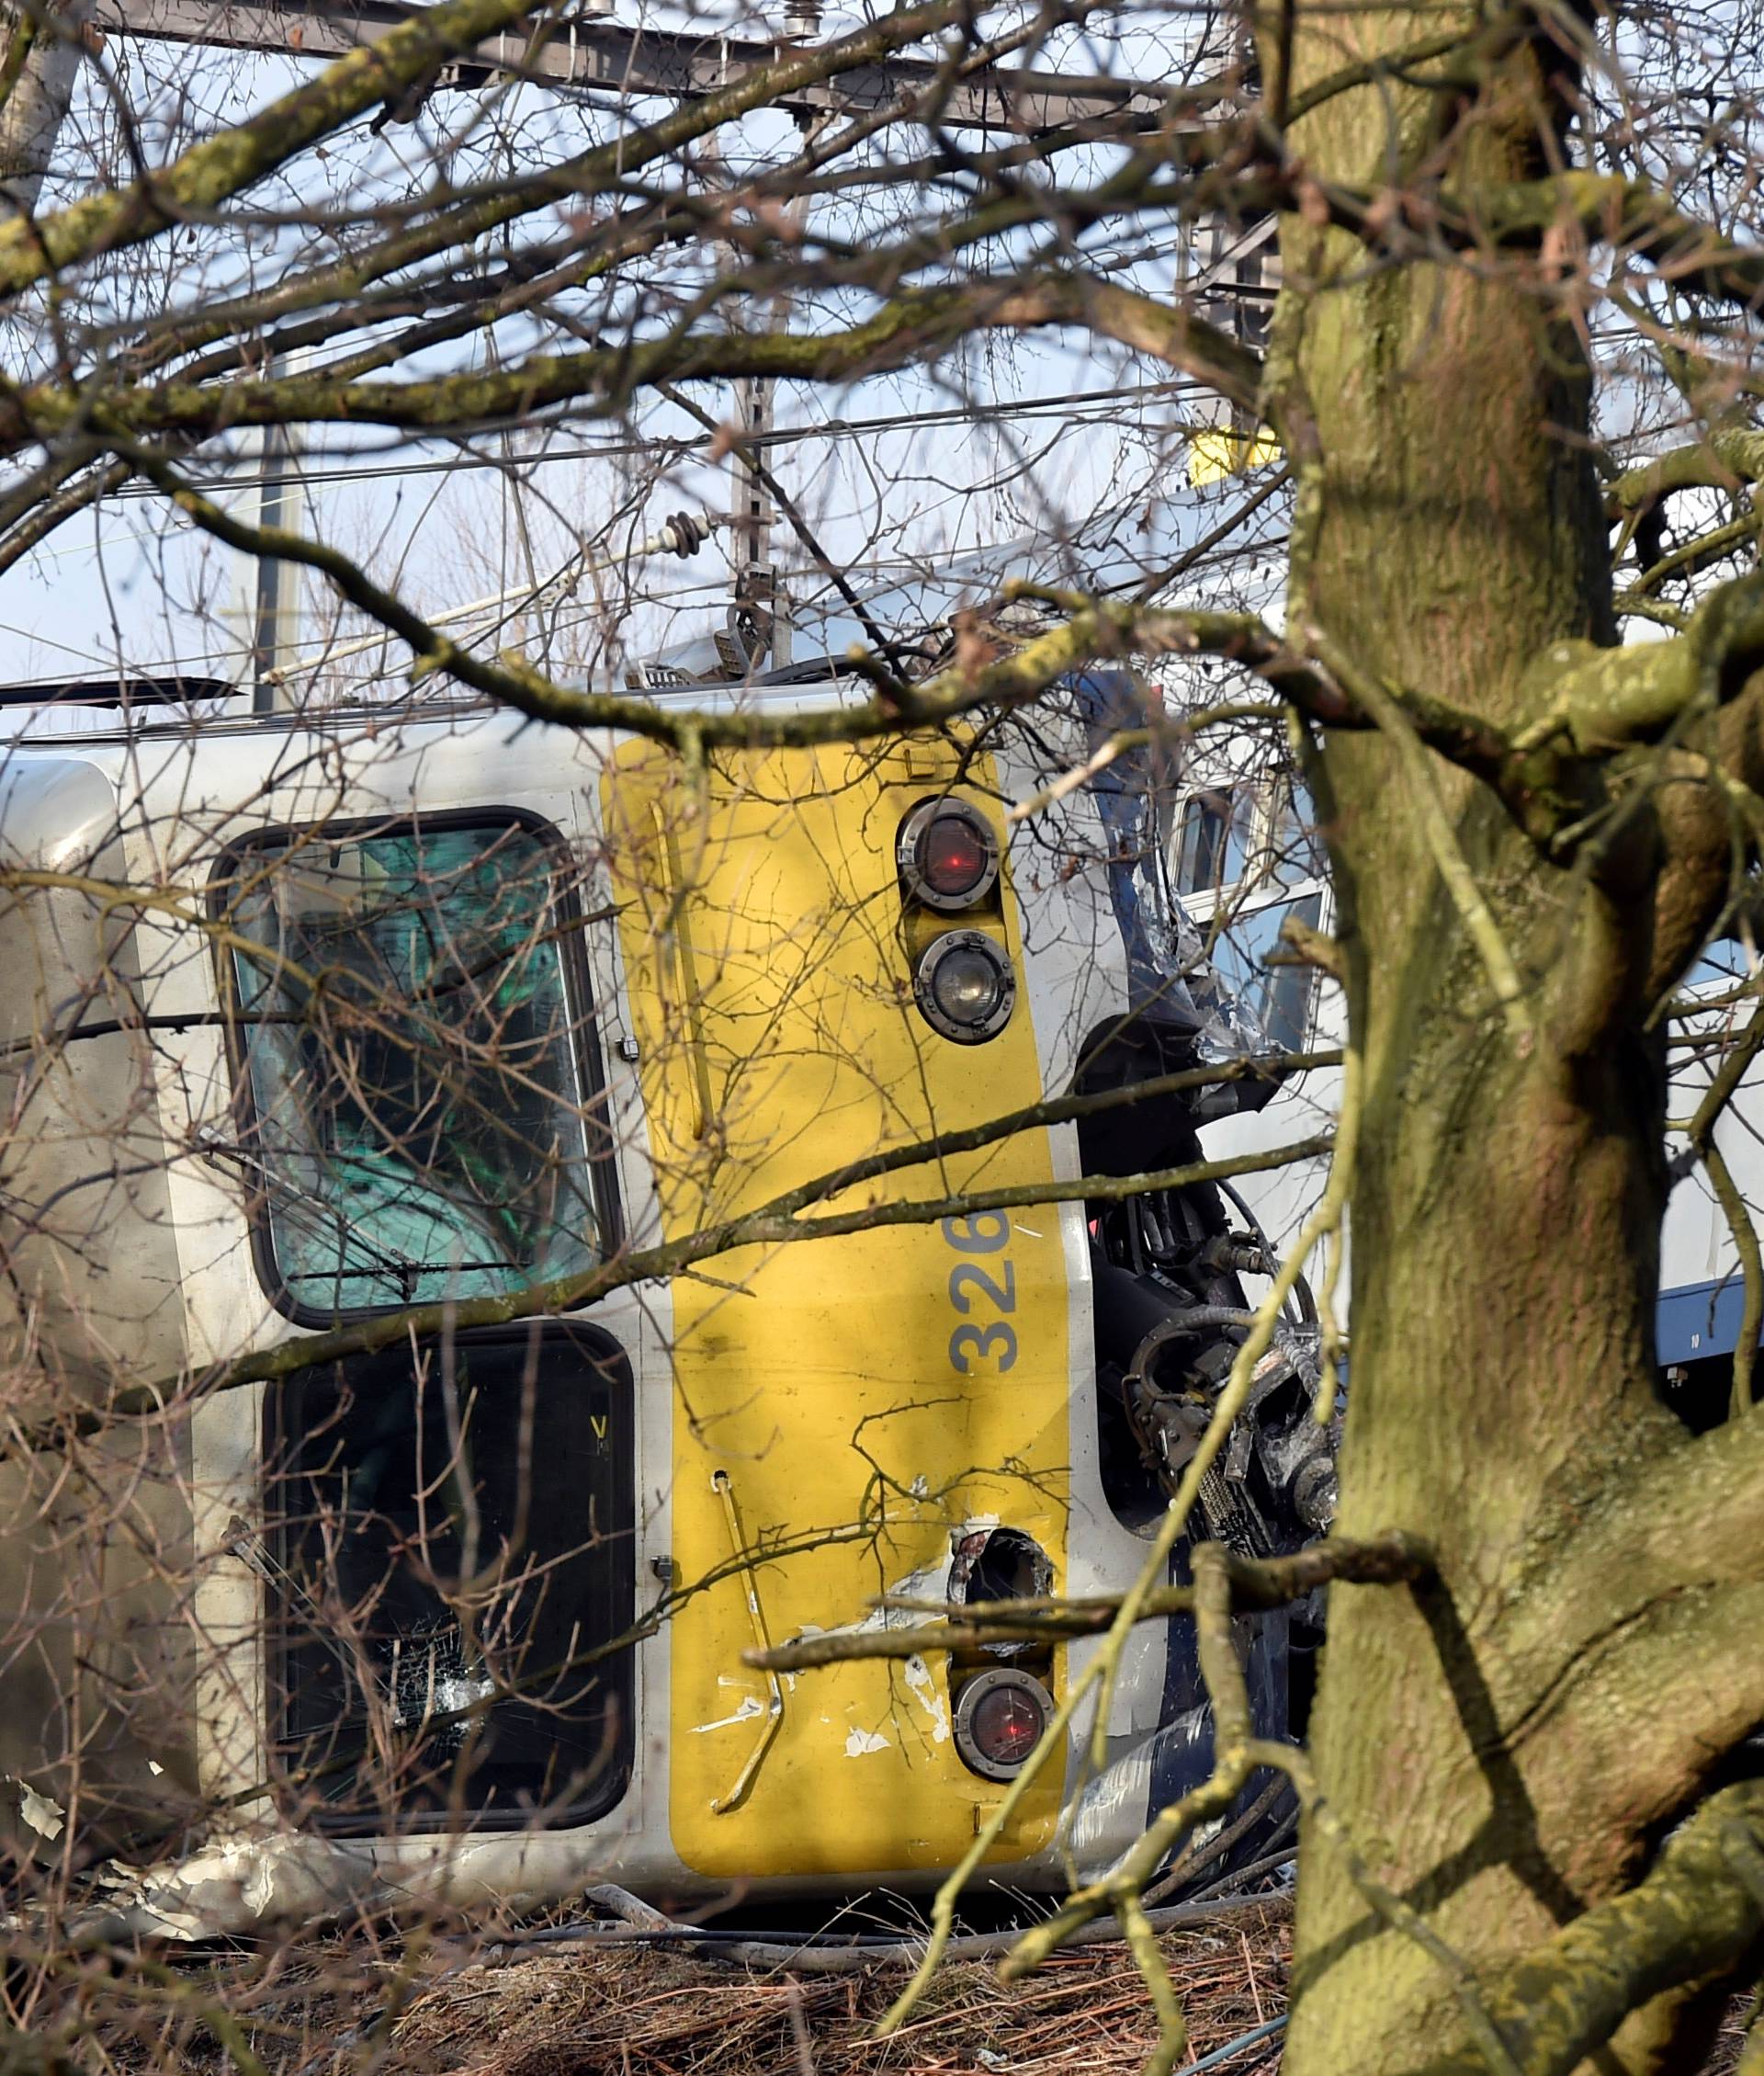 The wreckage of a passenger train is seen after it derailed in Kessel-Lo near Leuven